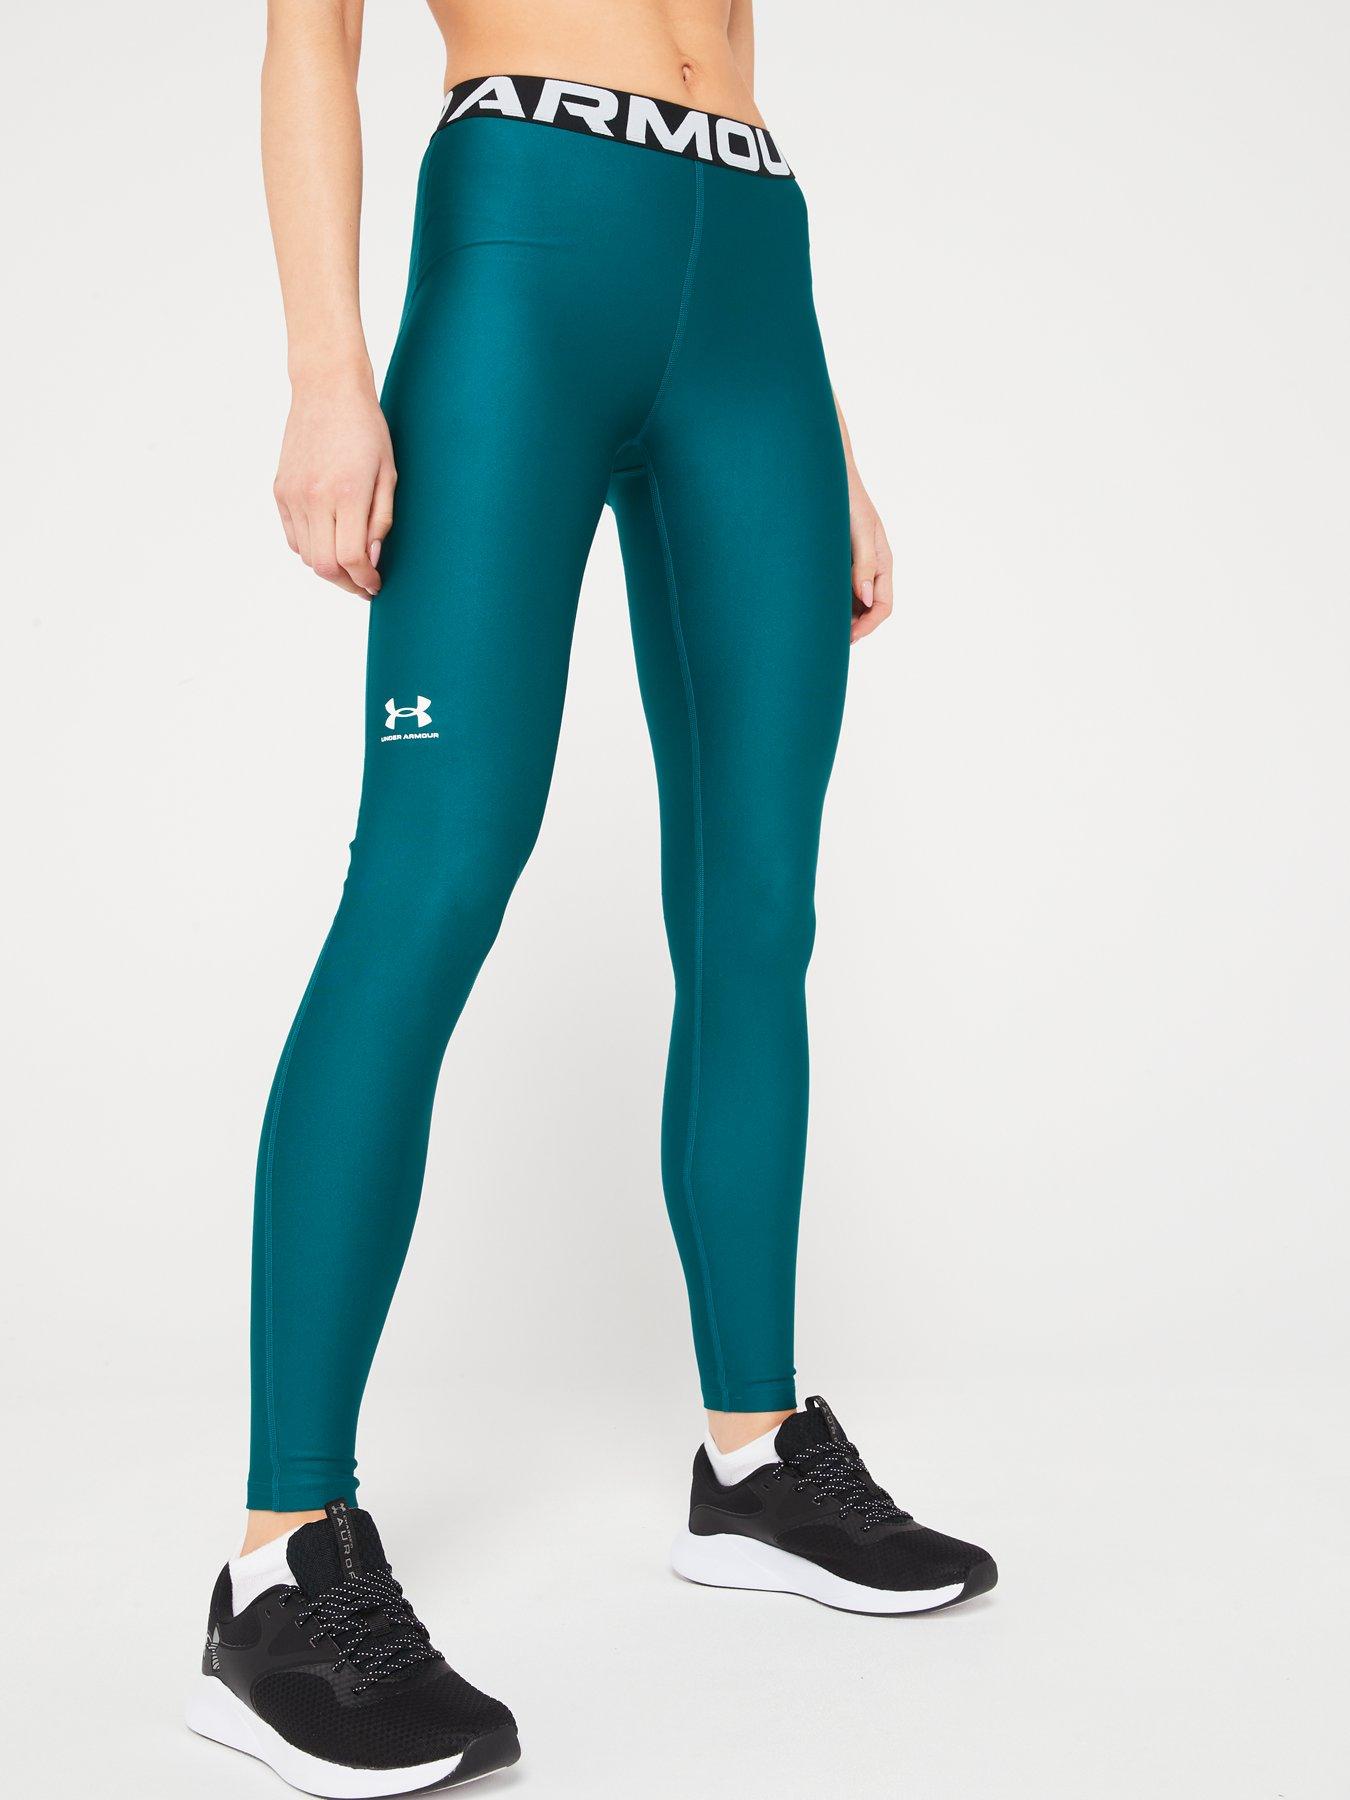 Under Armour Women's Easy Perf Pants  Trousers women, Pants for women, Workout  pants women